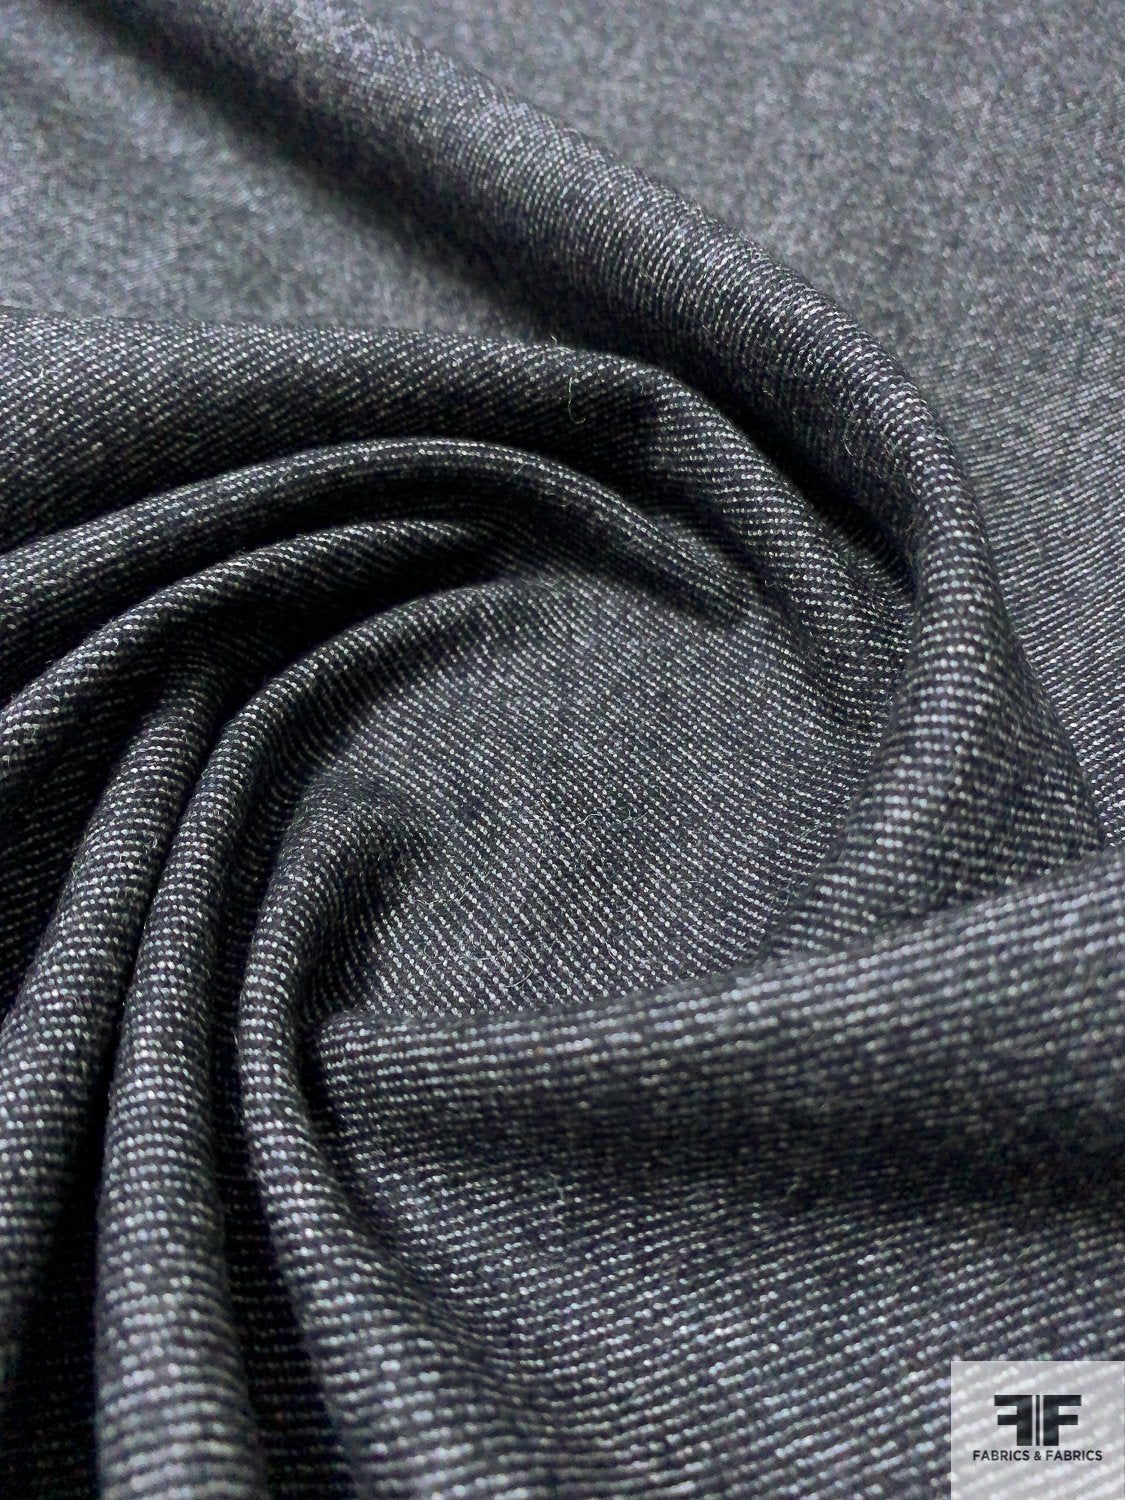 Double Faced Wool Flannel Fabric: 100% Wool Fabrics from Italy by Carnet,  SKU 00072833 at $150 — Buy Wool Fabrics Online